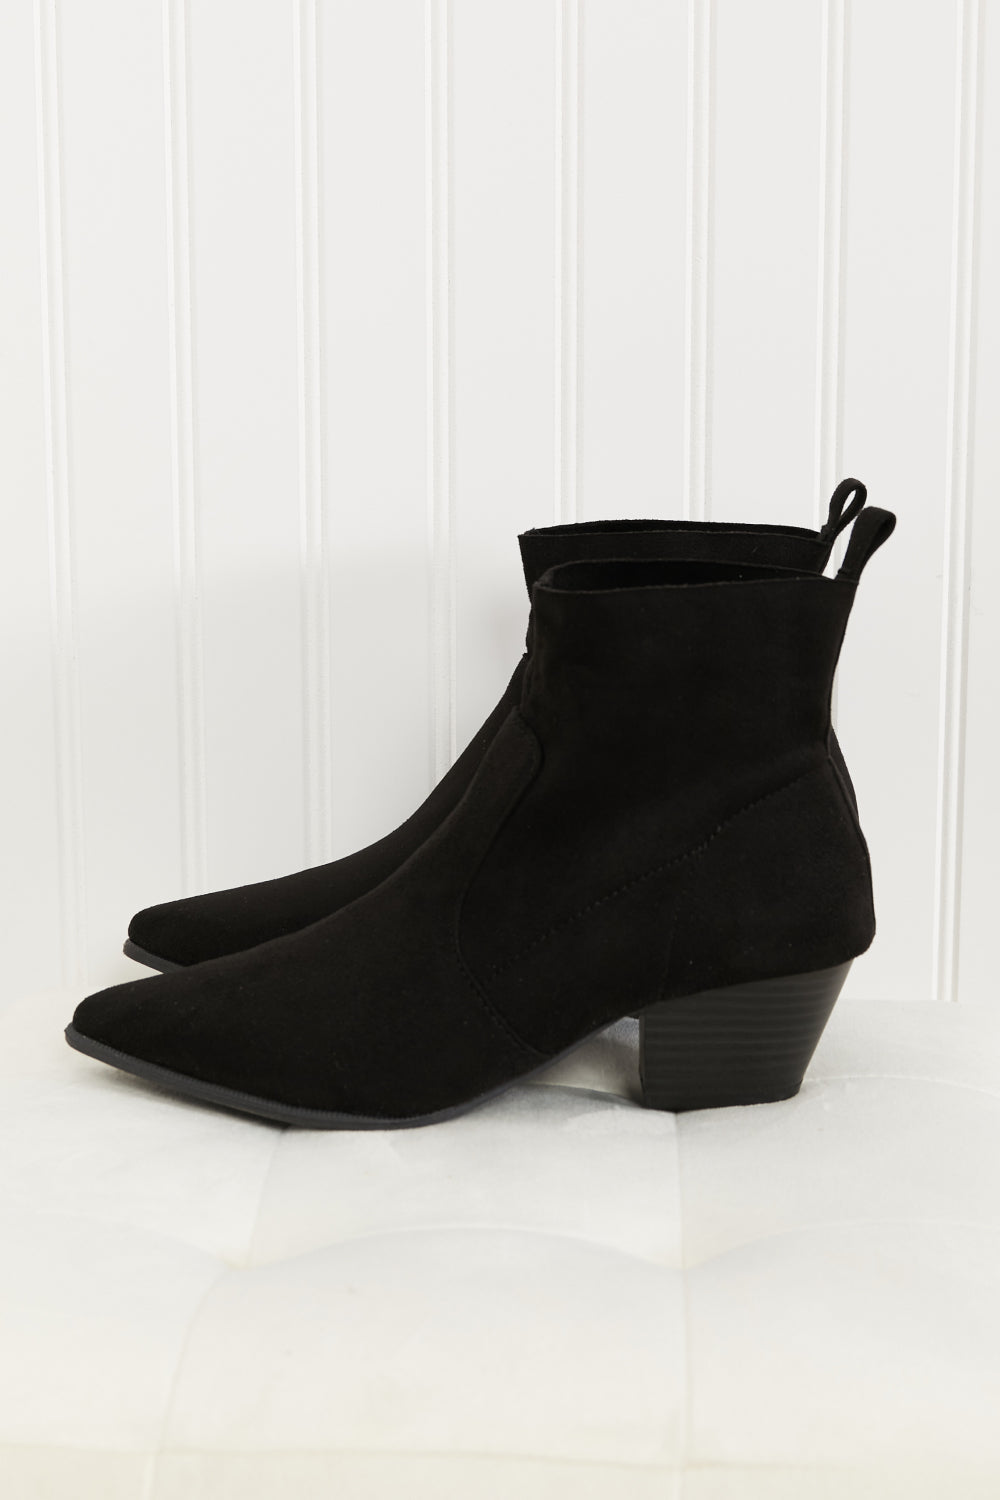 Qupid Leap of Faith Pointed Toe Sock Booties